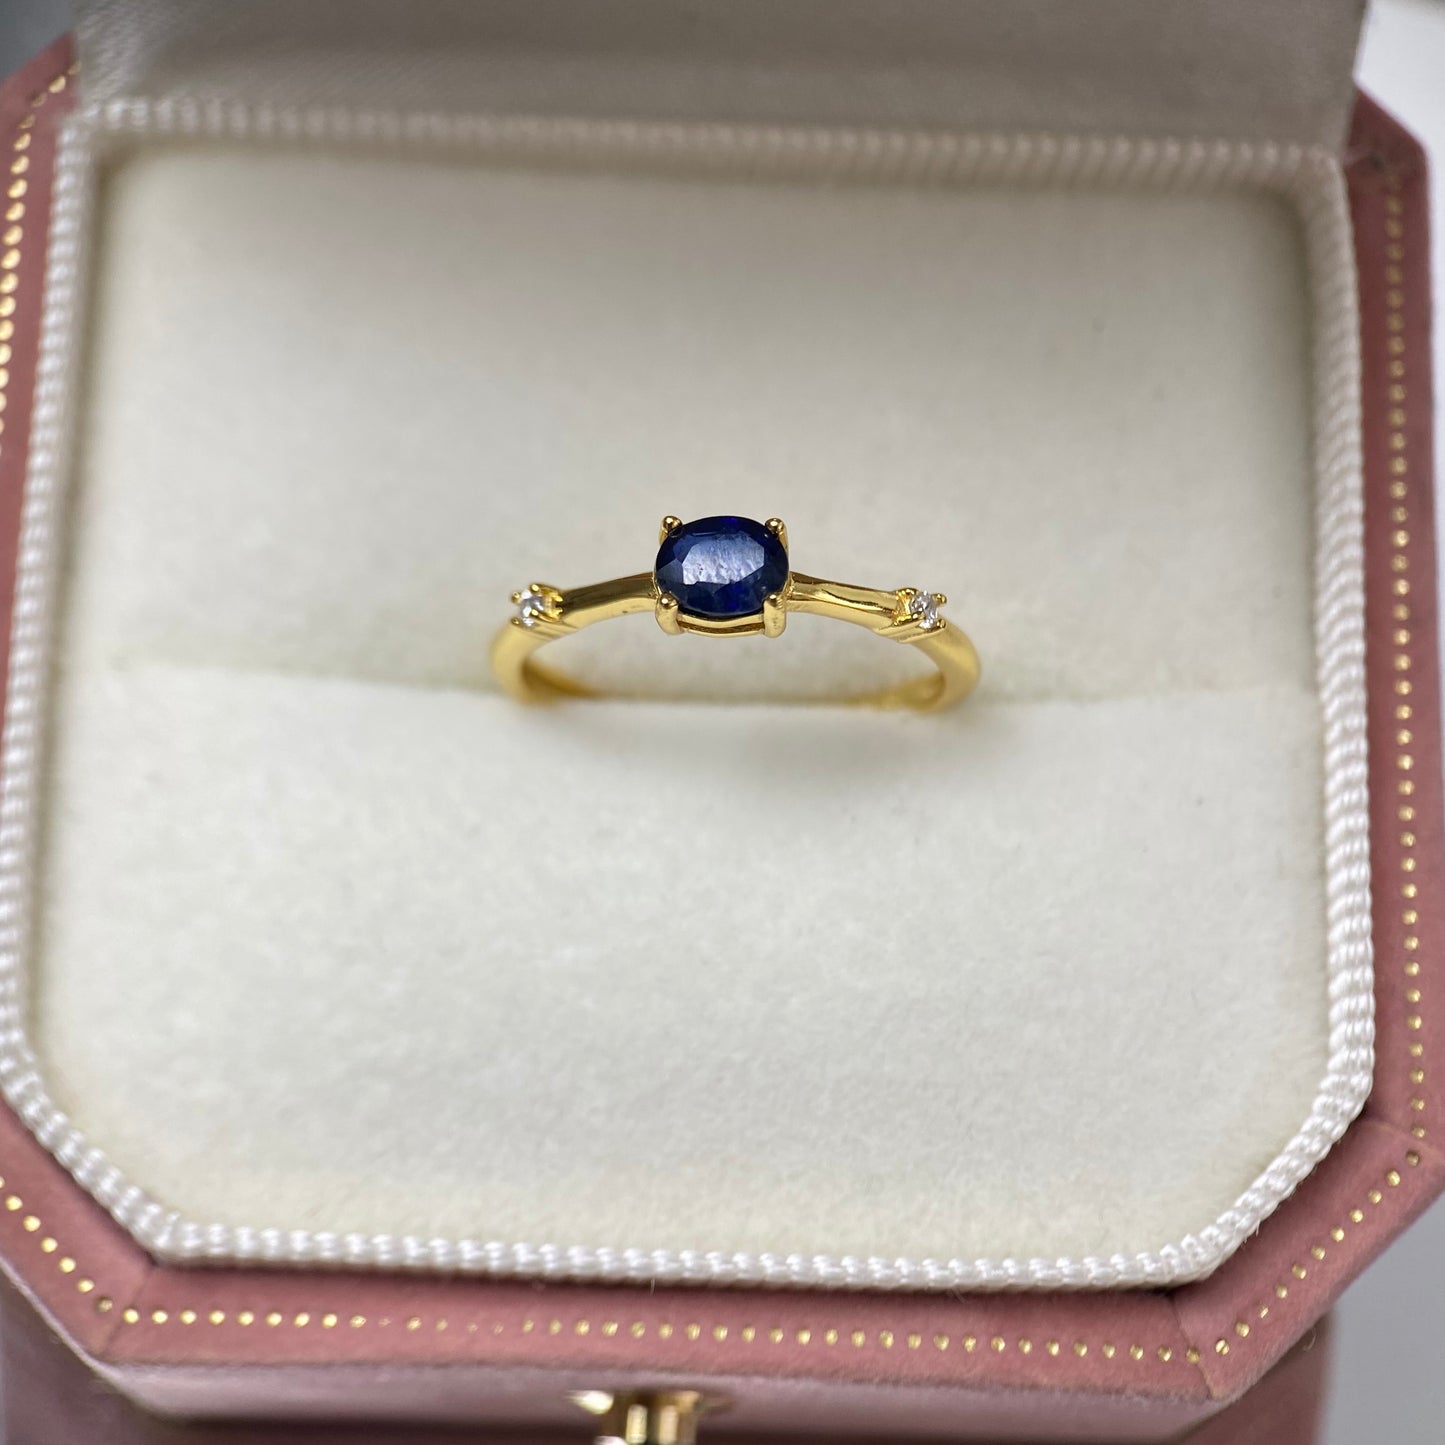 Sapphire ring s925 silver